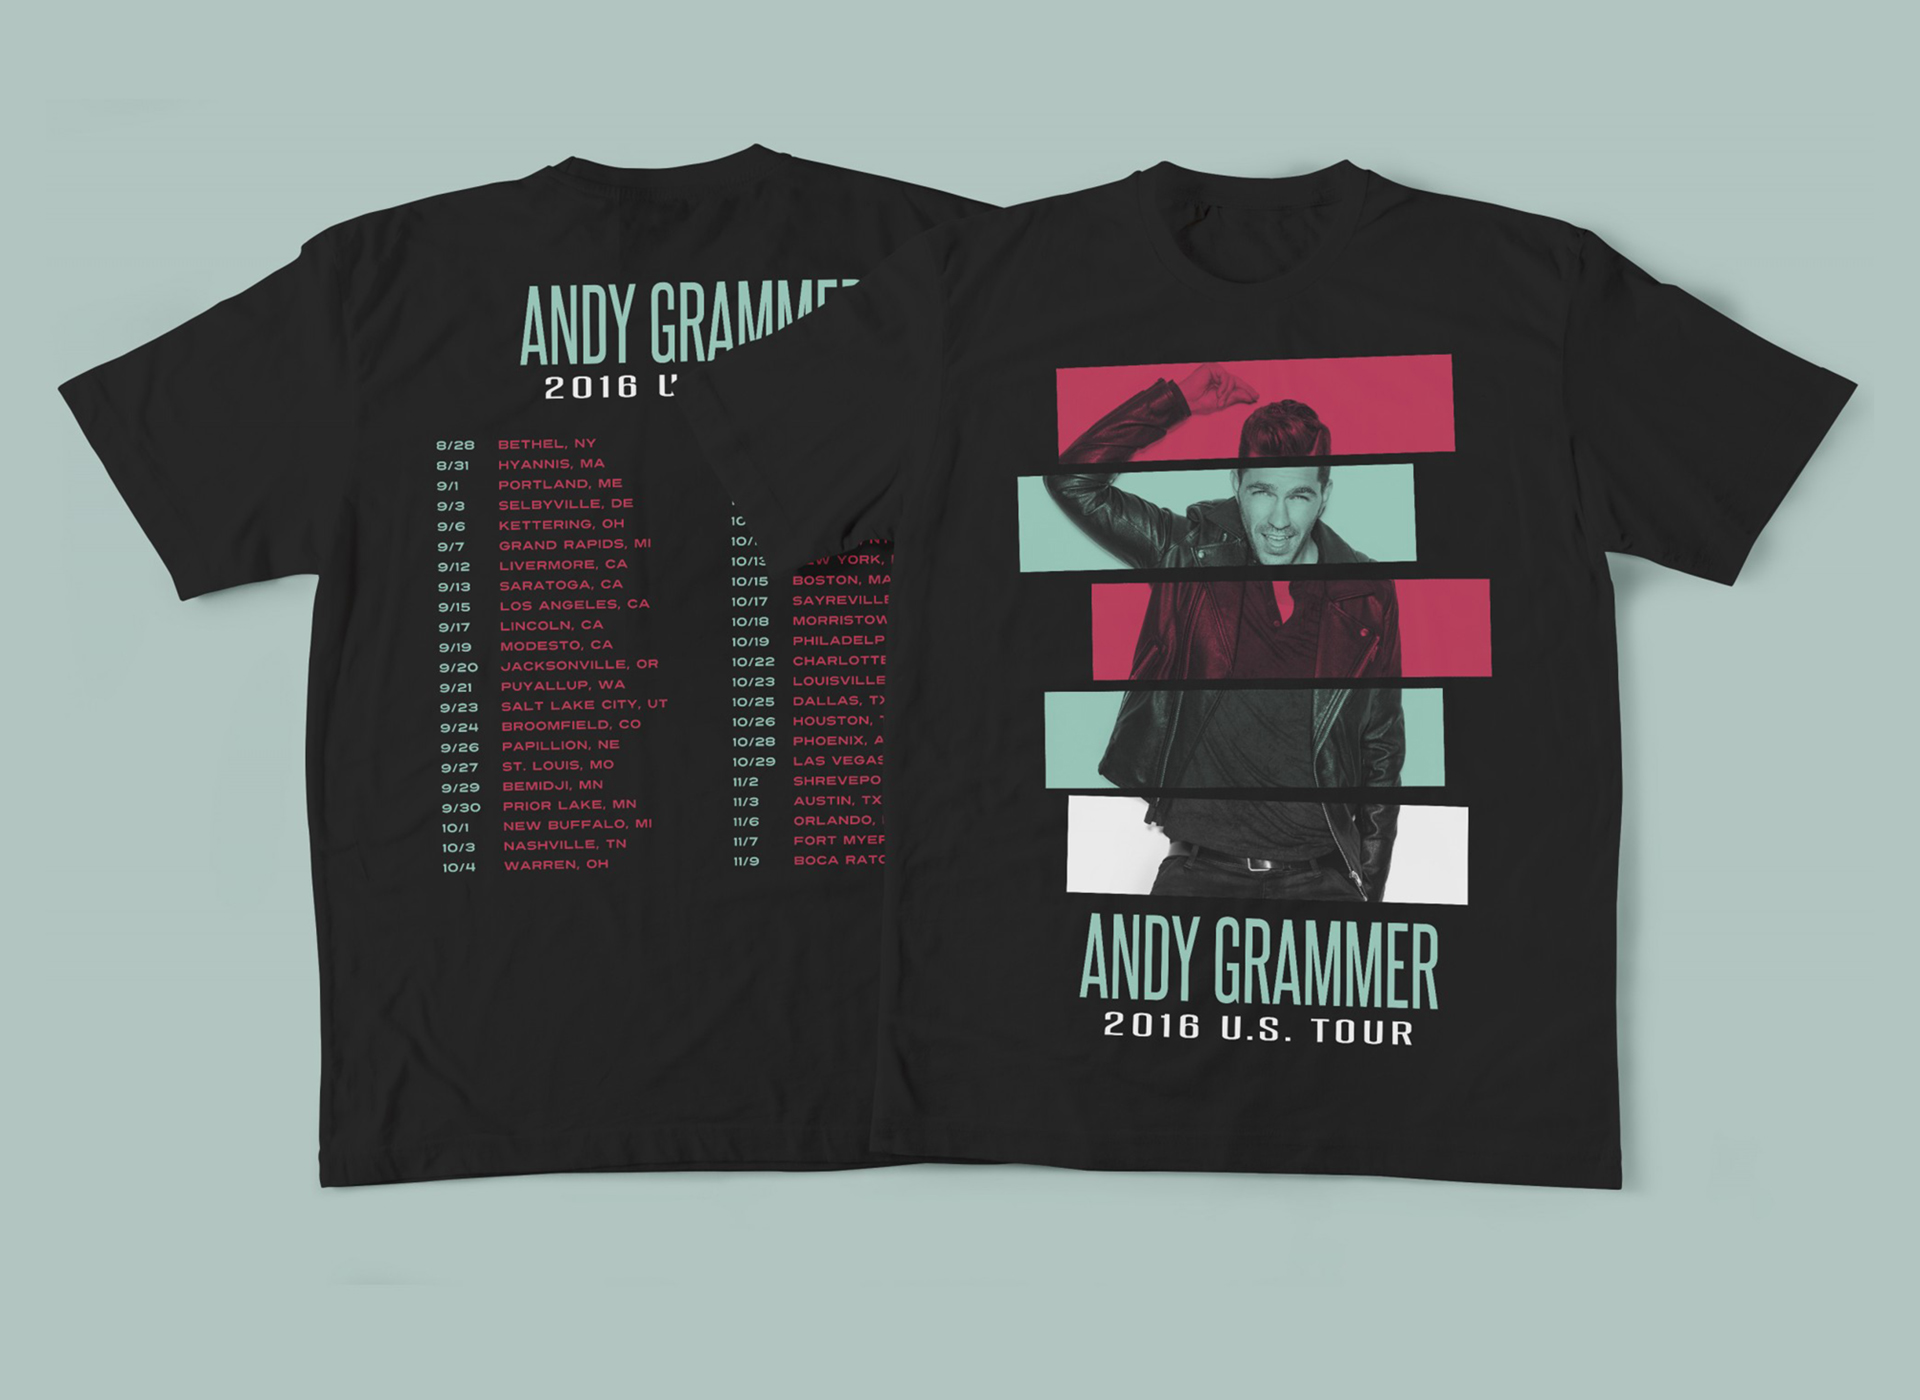 Andy Grammer 2016 Tour